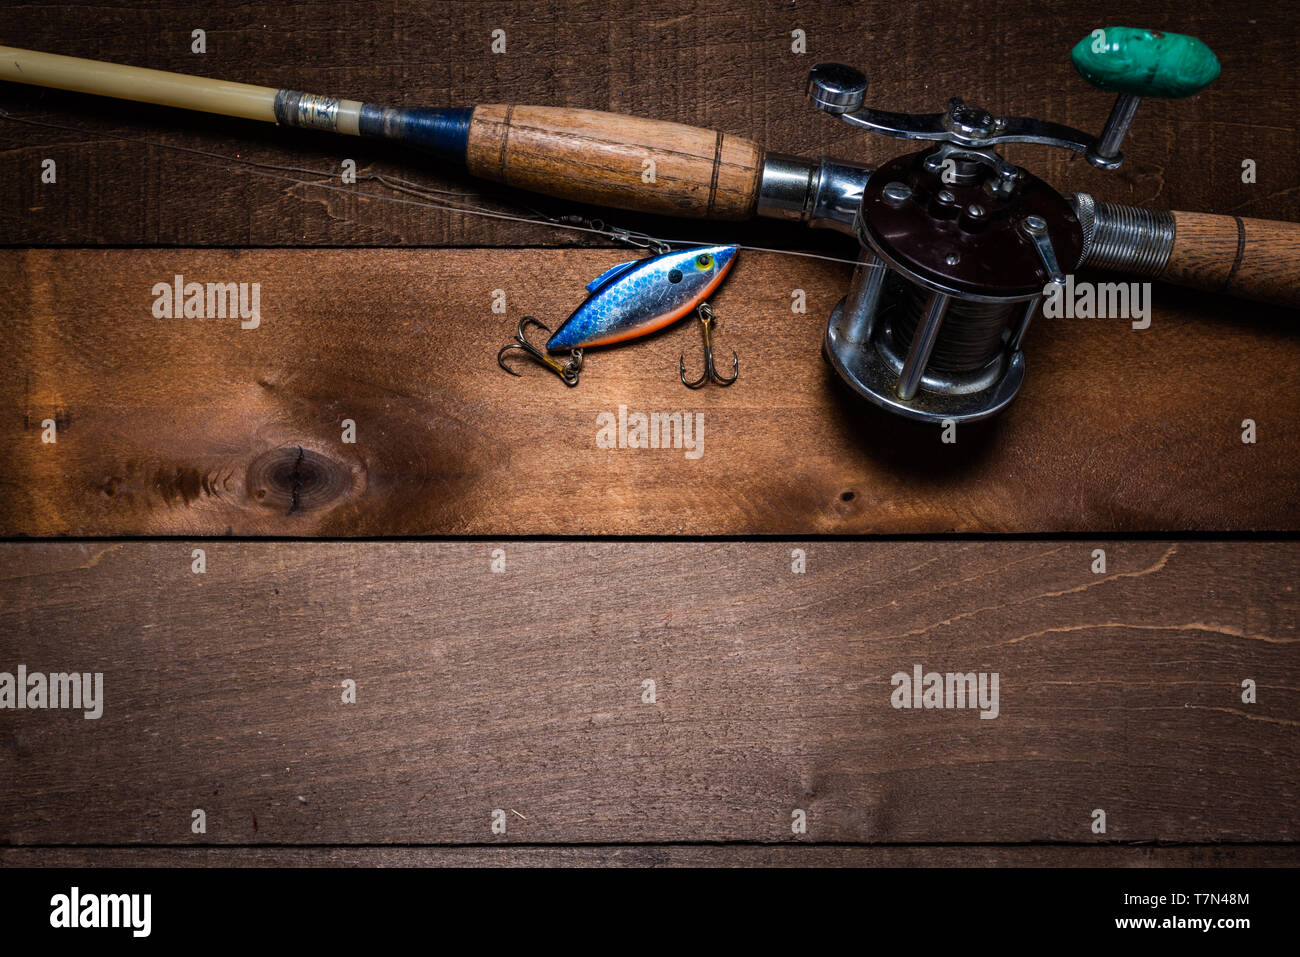 https://c8.alamy.com/comp/T7N48M/a-vintage-fishing-rod-and-reel-with-a-lure-on-a-wooden-plank-background-with-copy-space-T7N48M.jpg